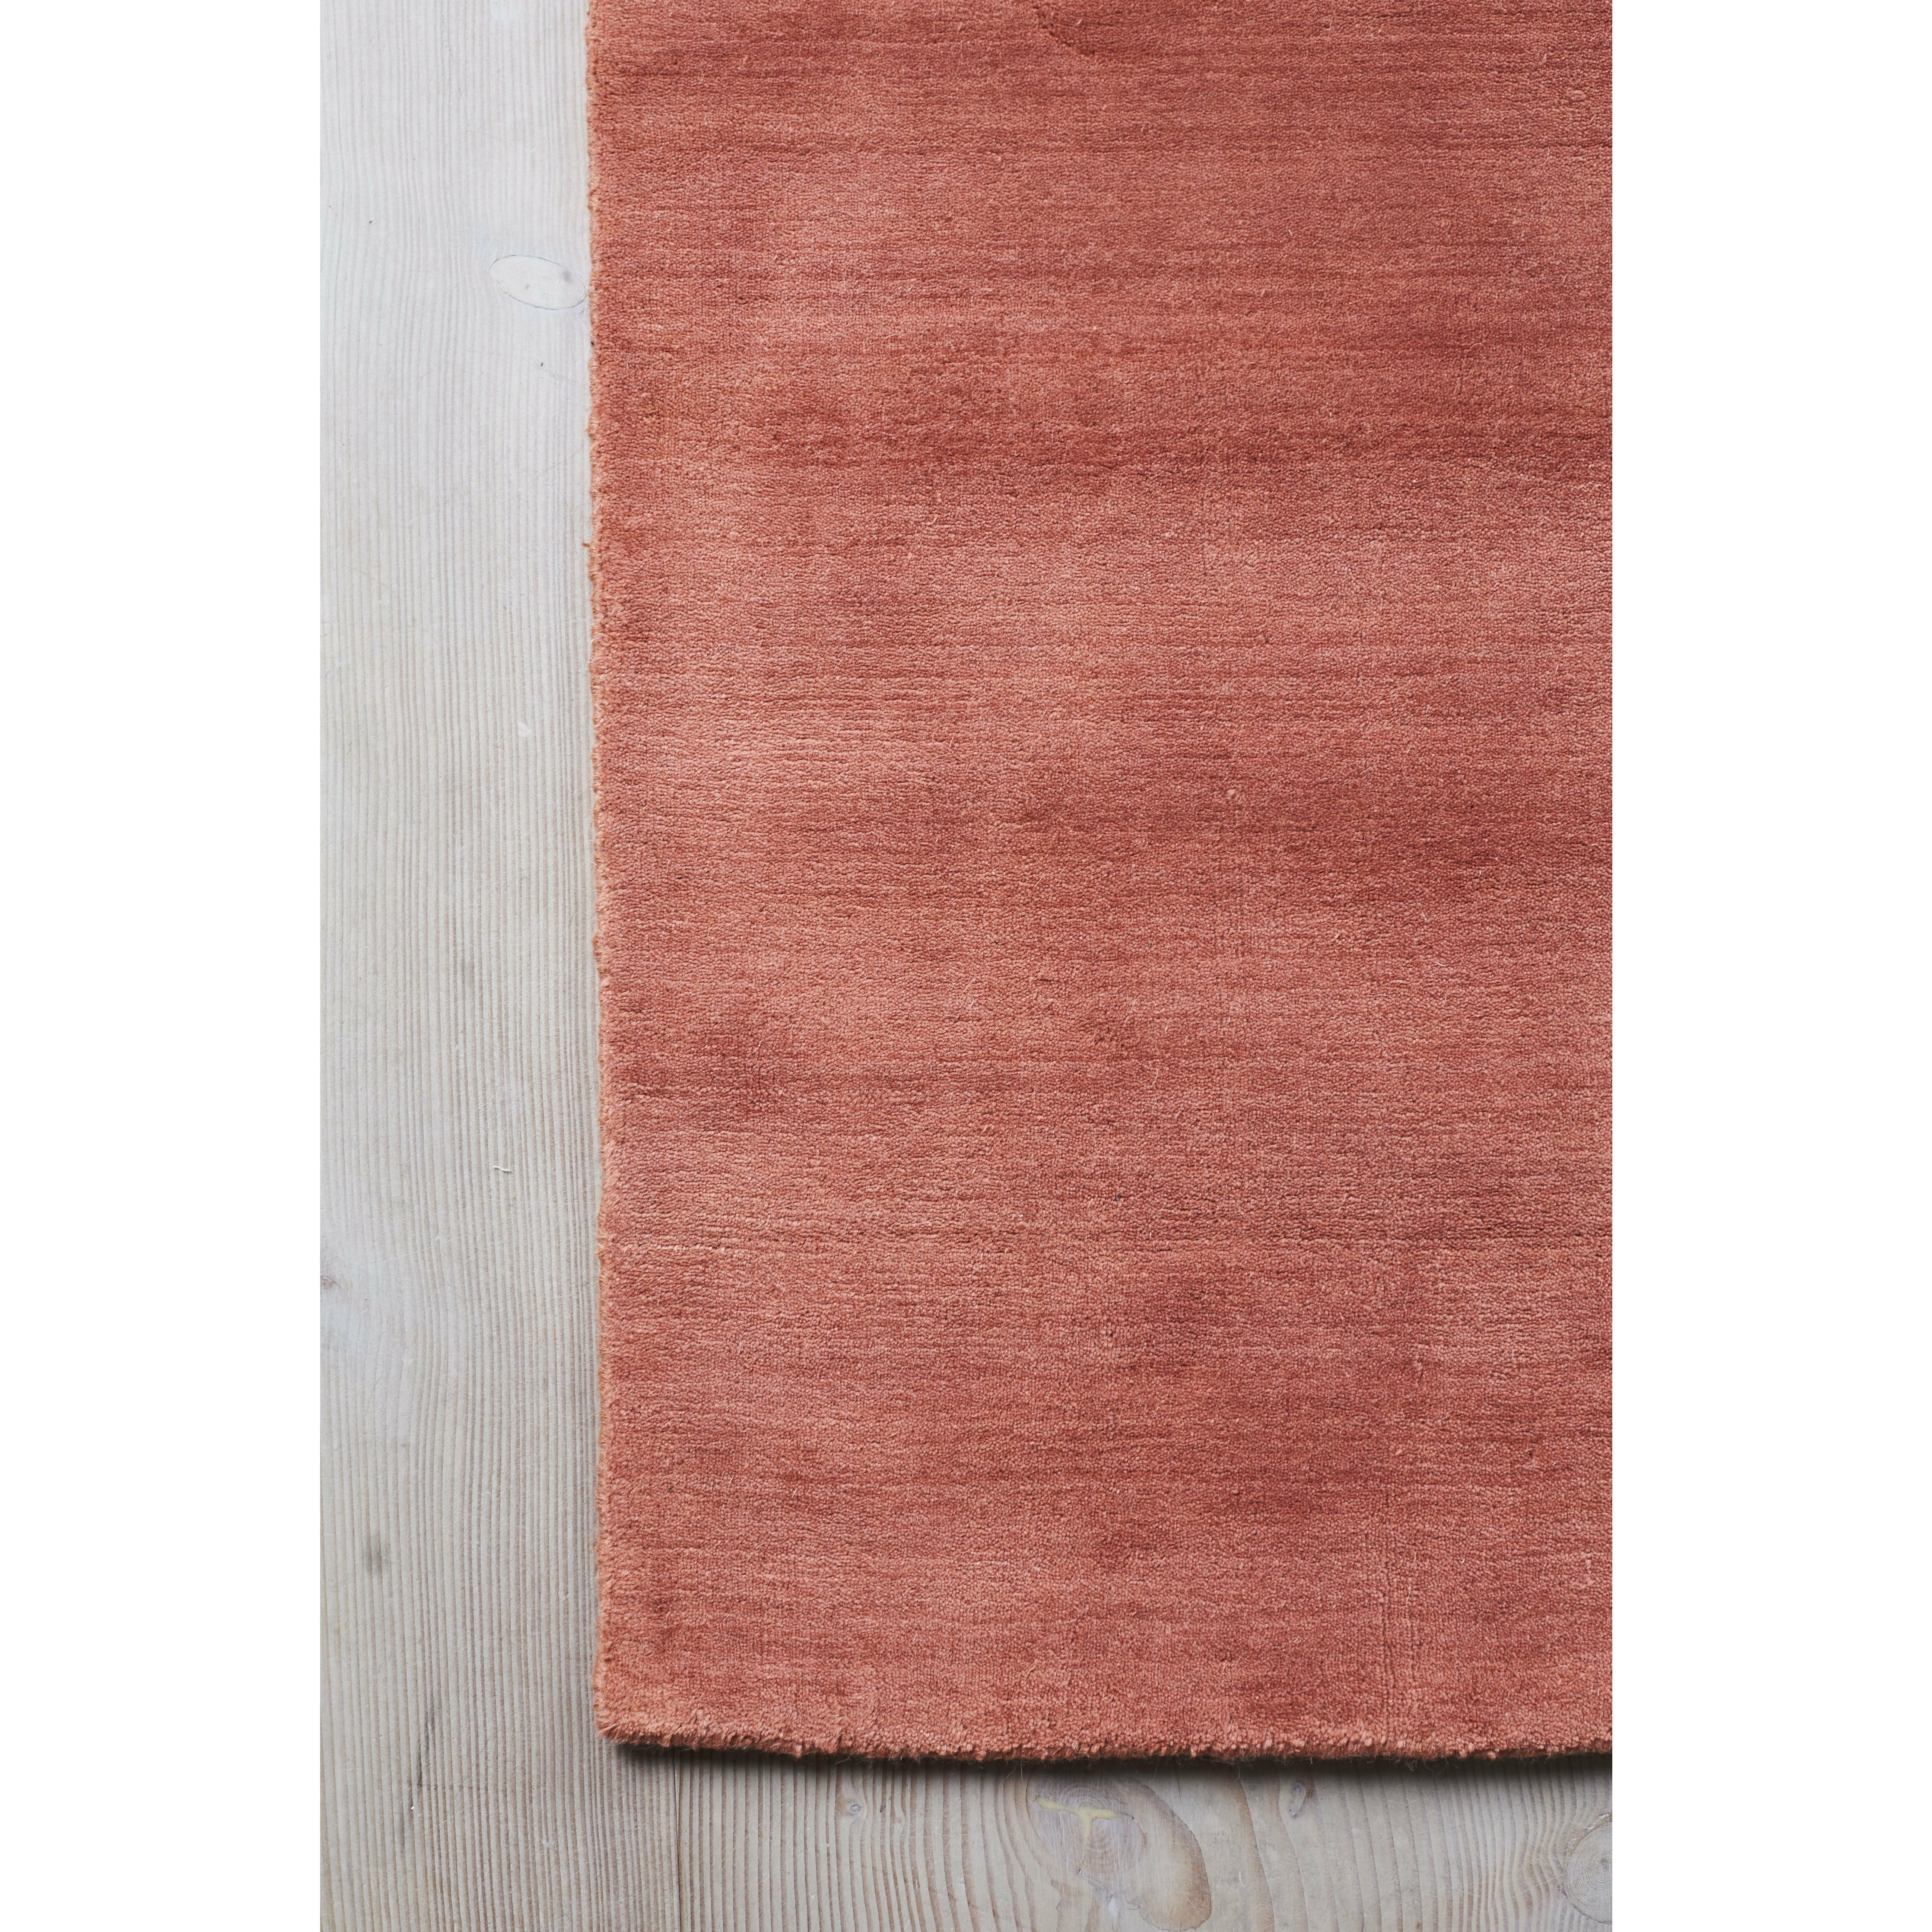 Massimo Earth Tapis Bambou Terre Cuite, 170x240 Cm